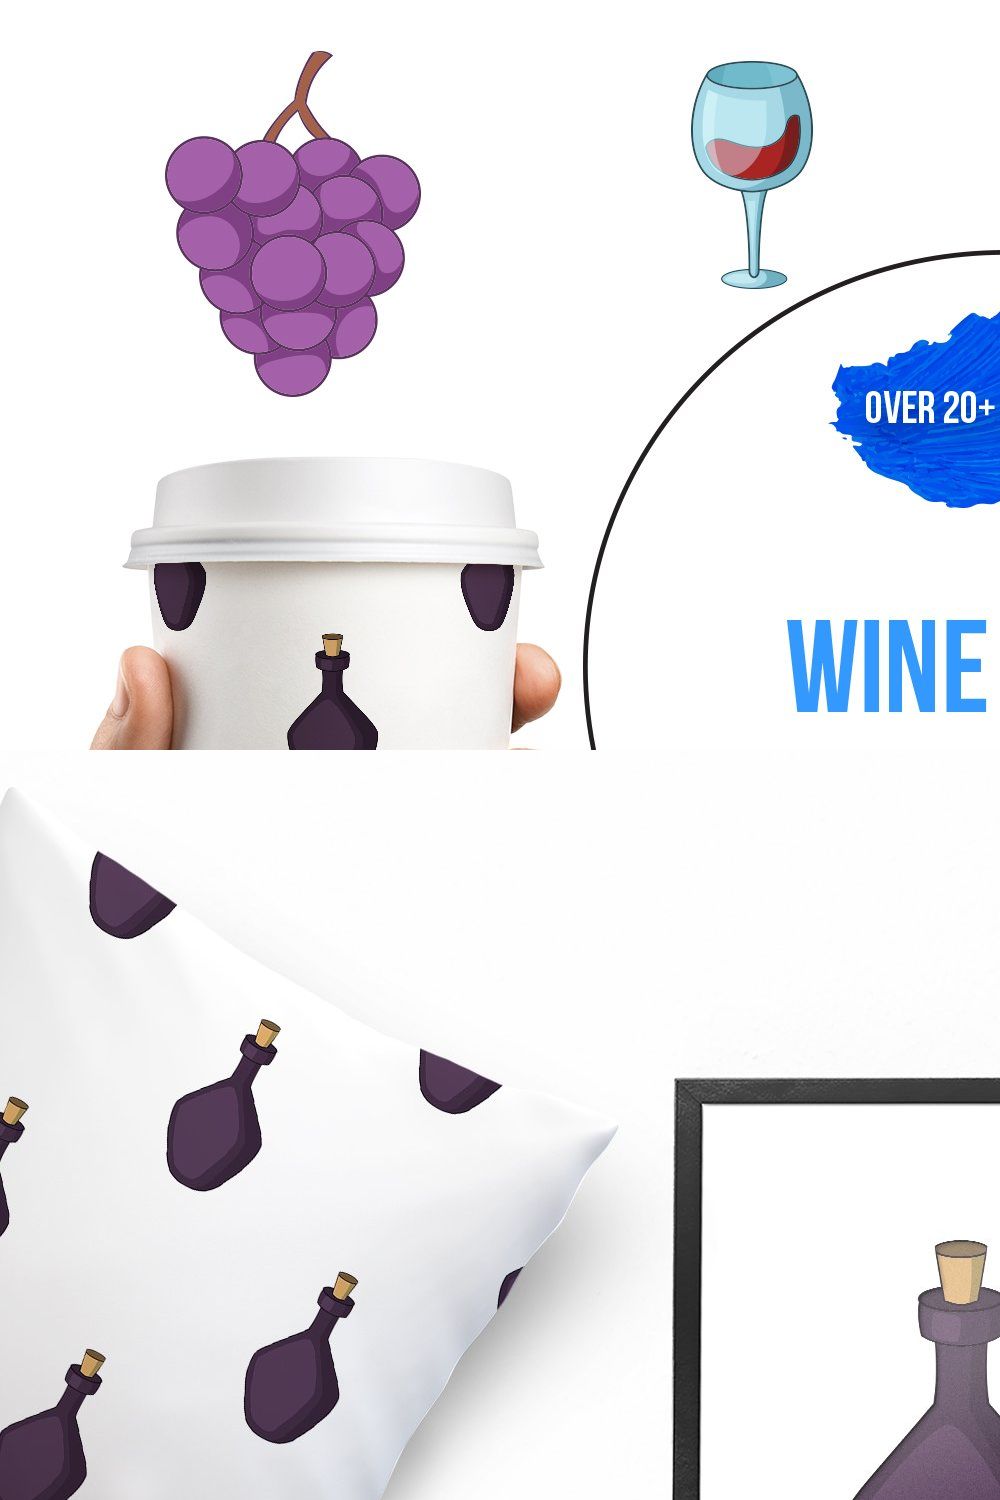 Wine yard icons set, cartoon style pinterest preview image.